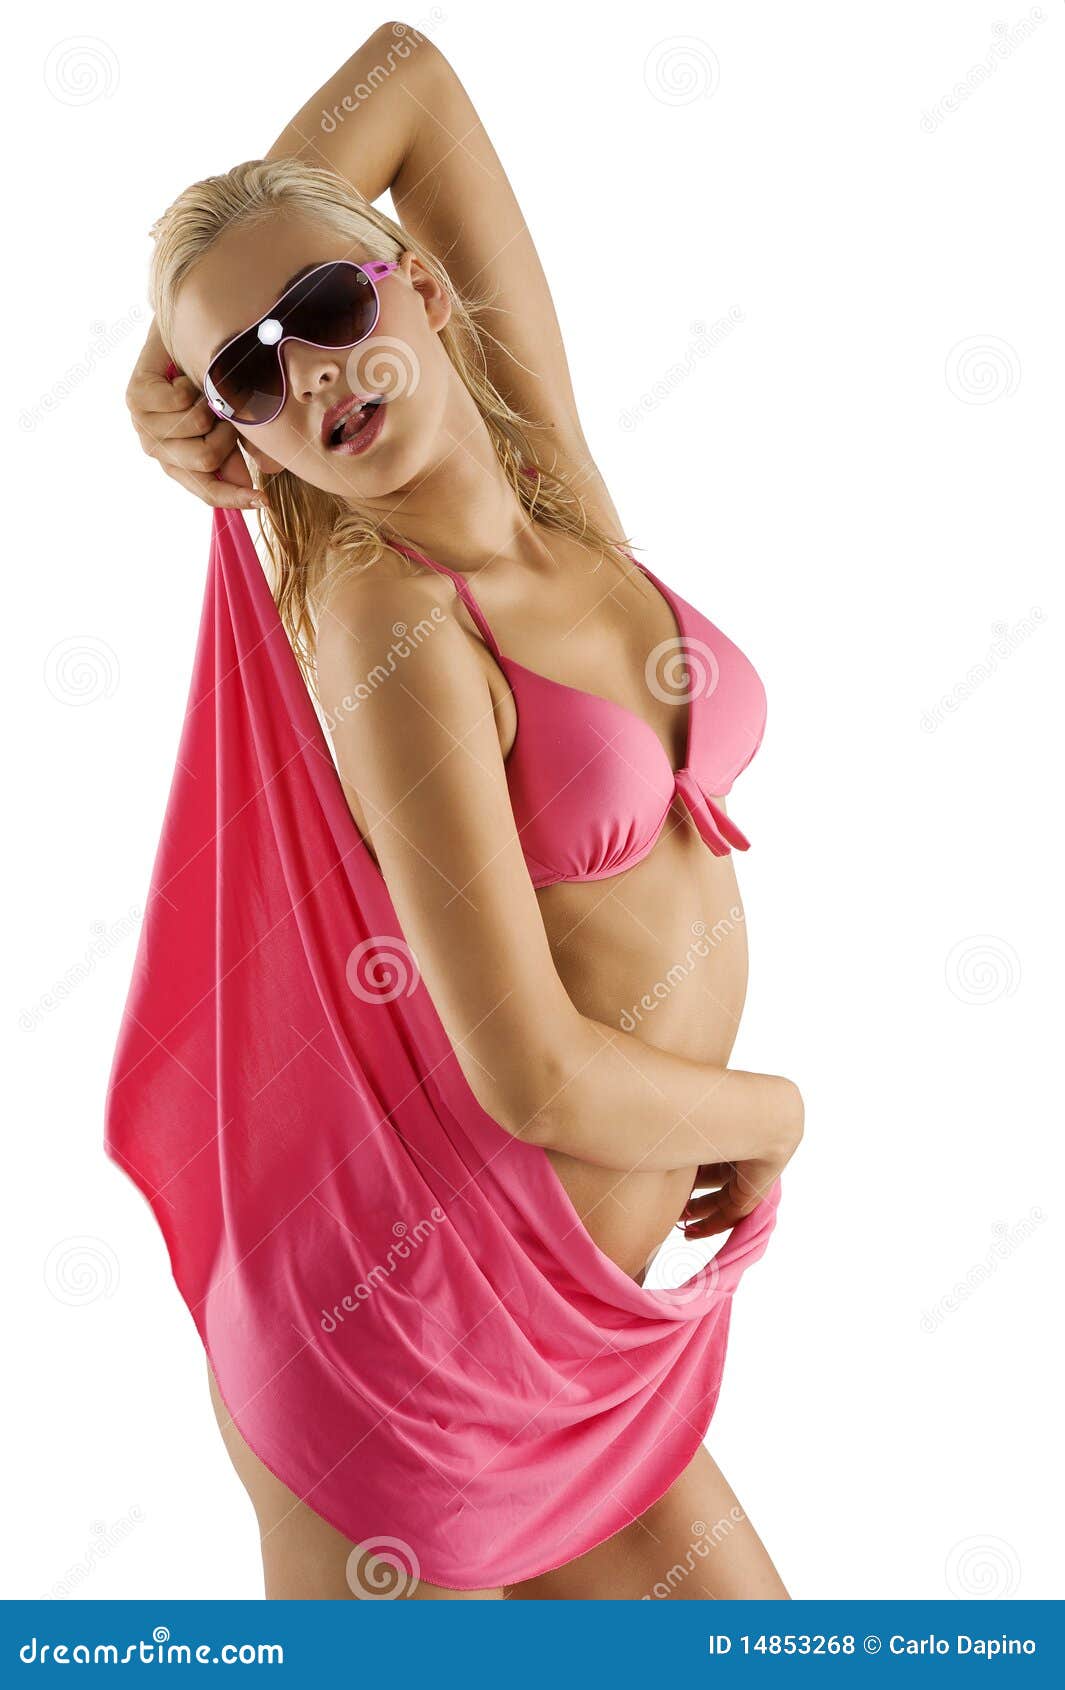 Blond Girl In Pink Bikini And Sunglasses Royalty Free Stock Image 14853268 